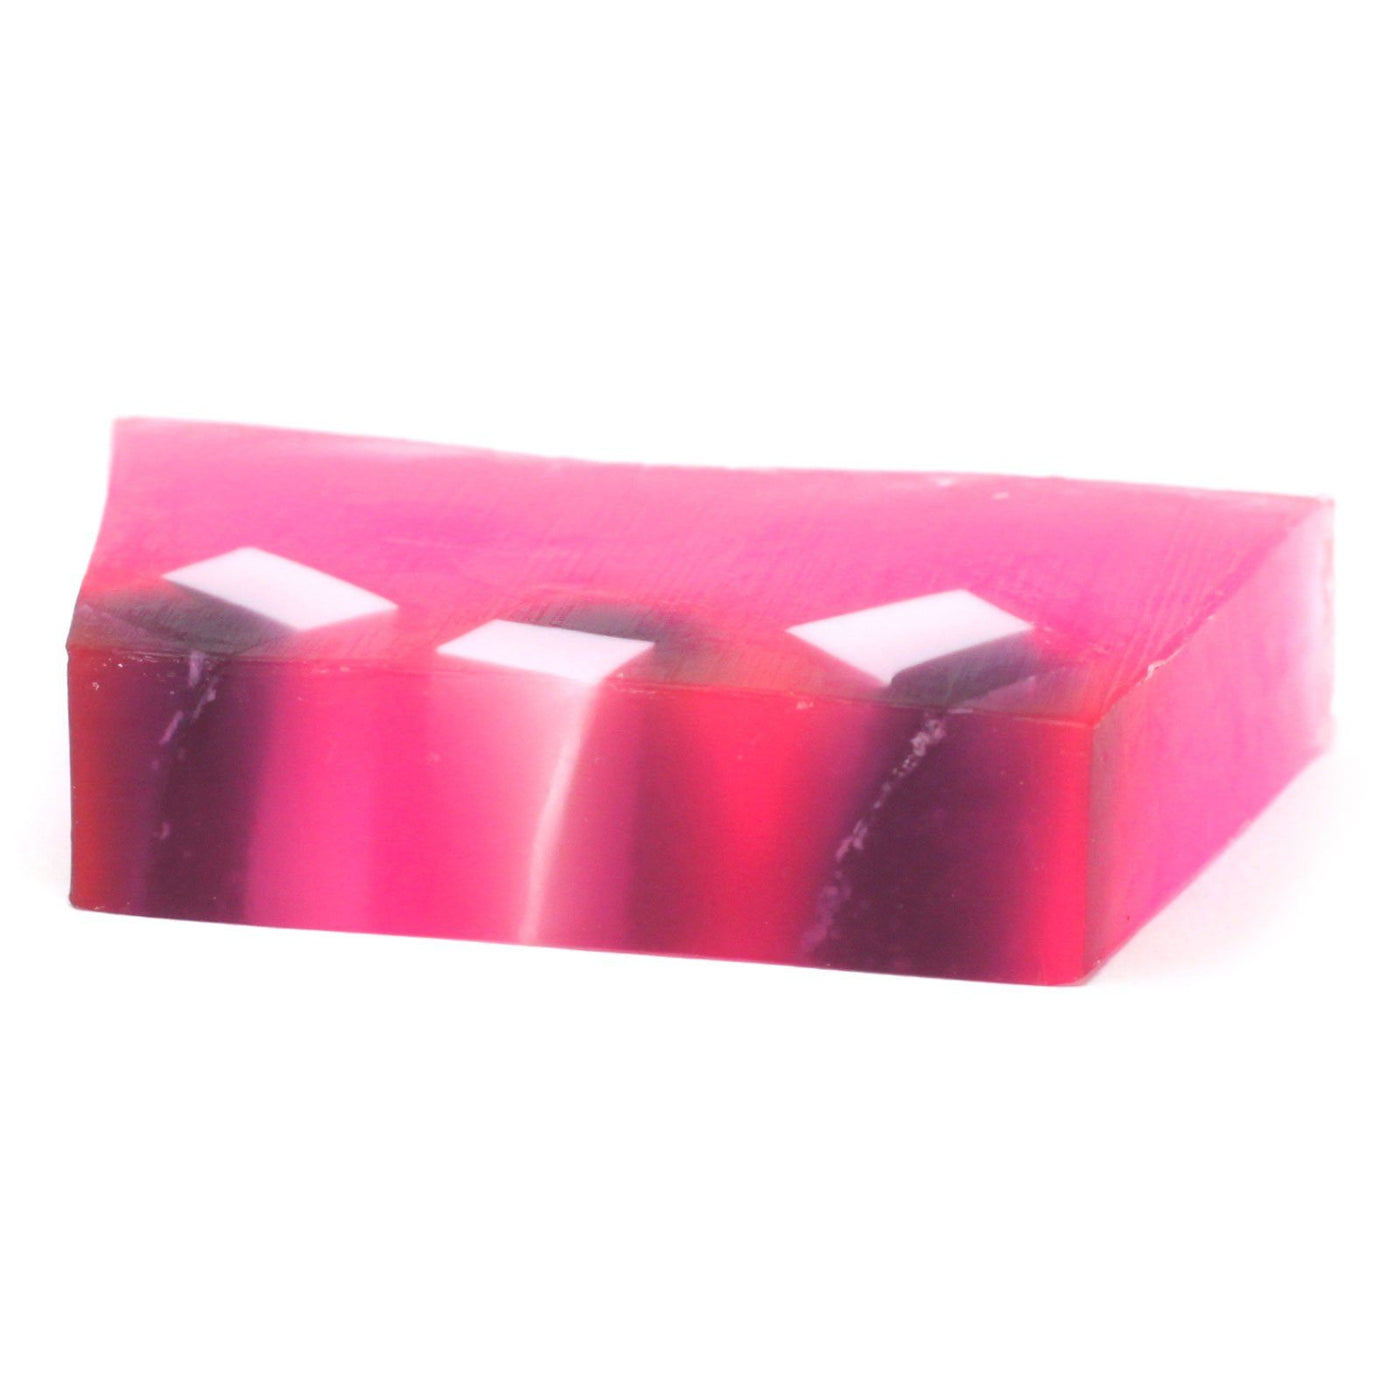 Luxury Pink Bubbly Champagne Soap Bars